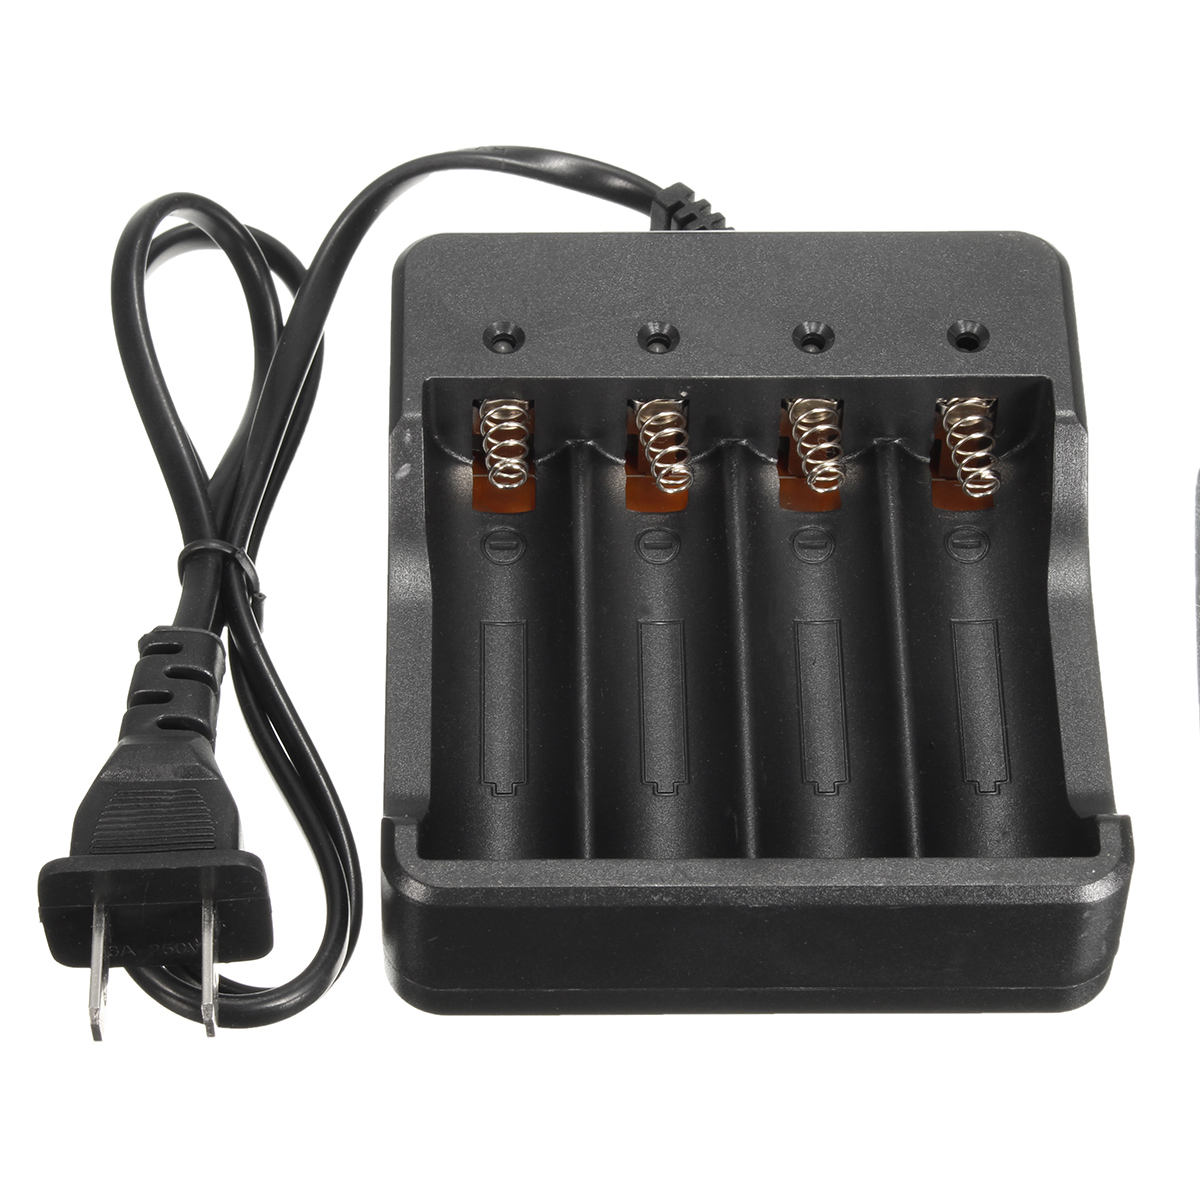 DC-42V-1200mA-Smart-Charger-4-Slots-Fast-Charging-For-18650-Li-ion-Battery-1623587-7